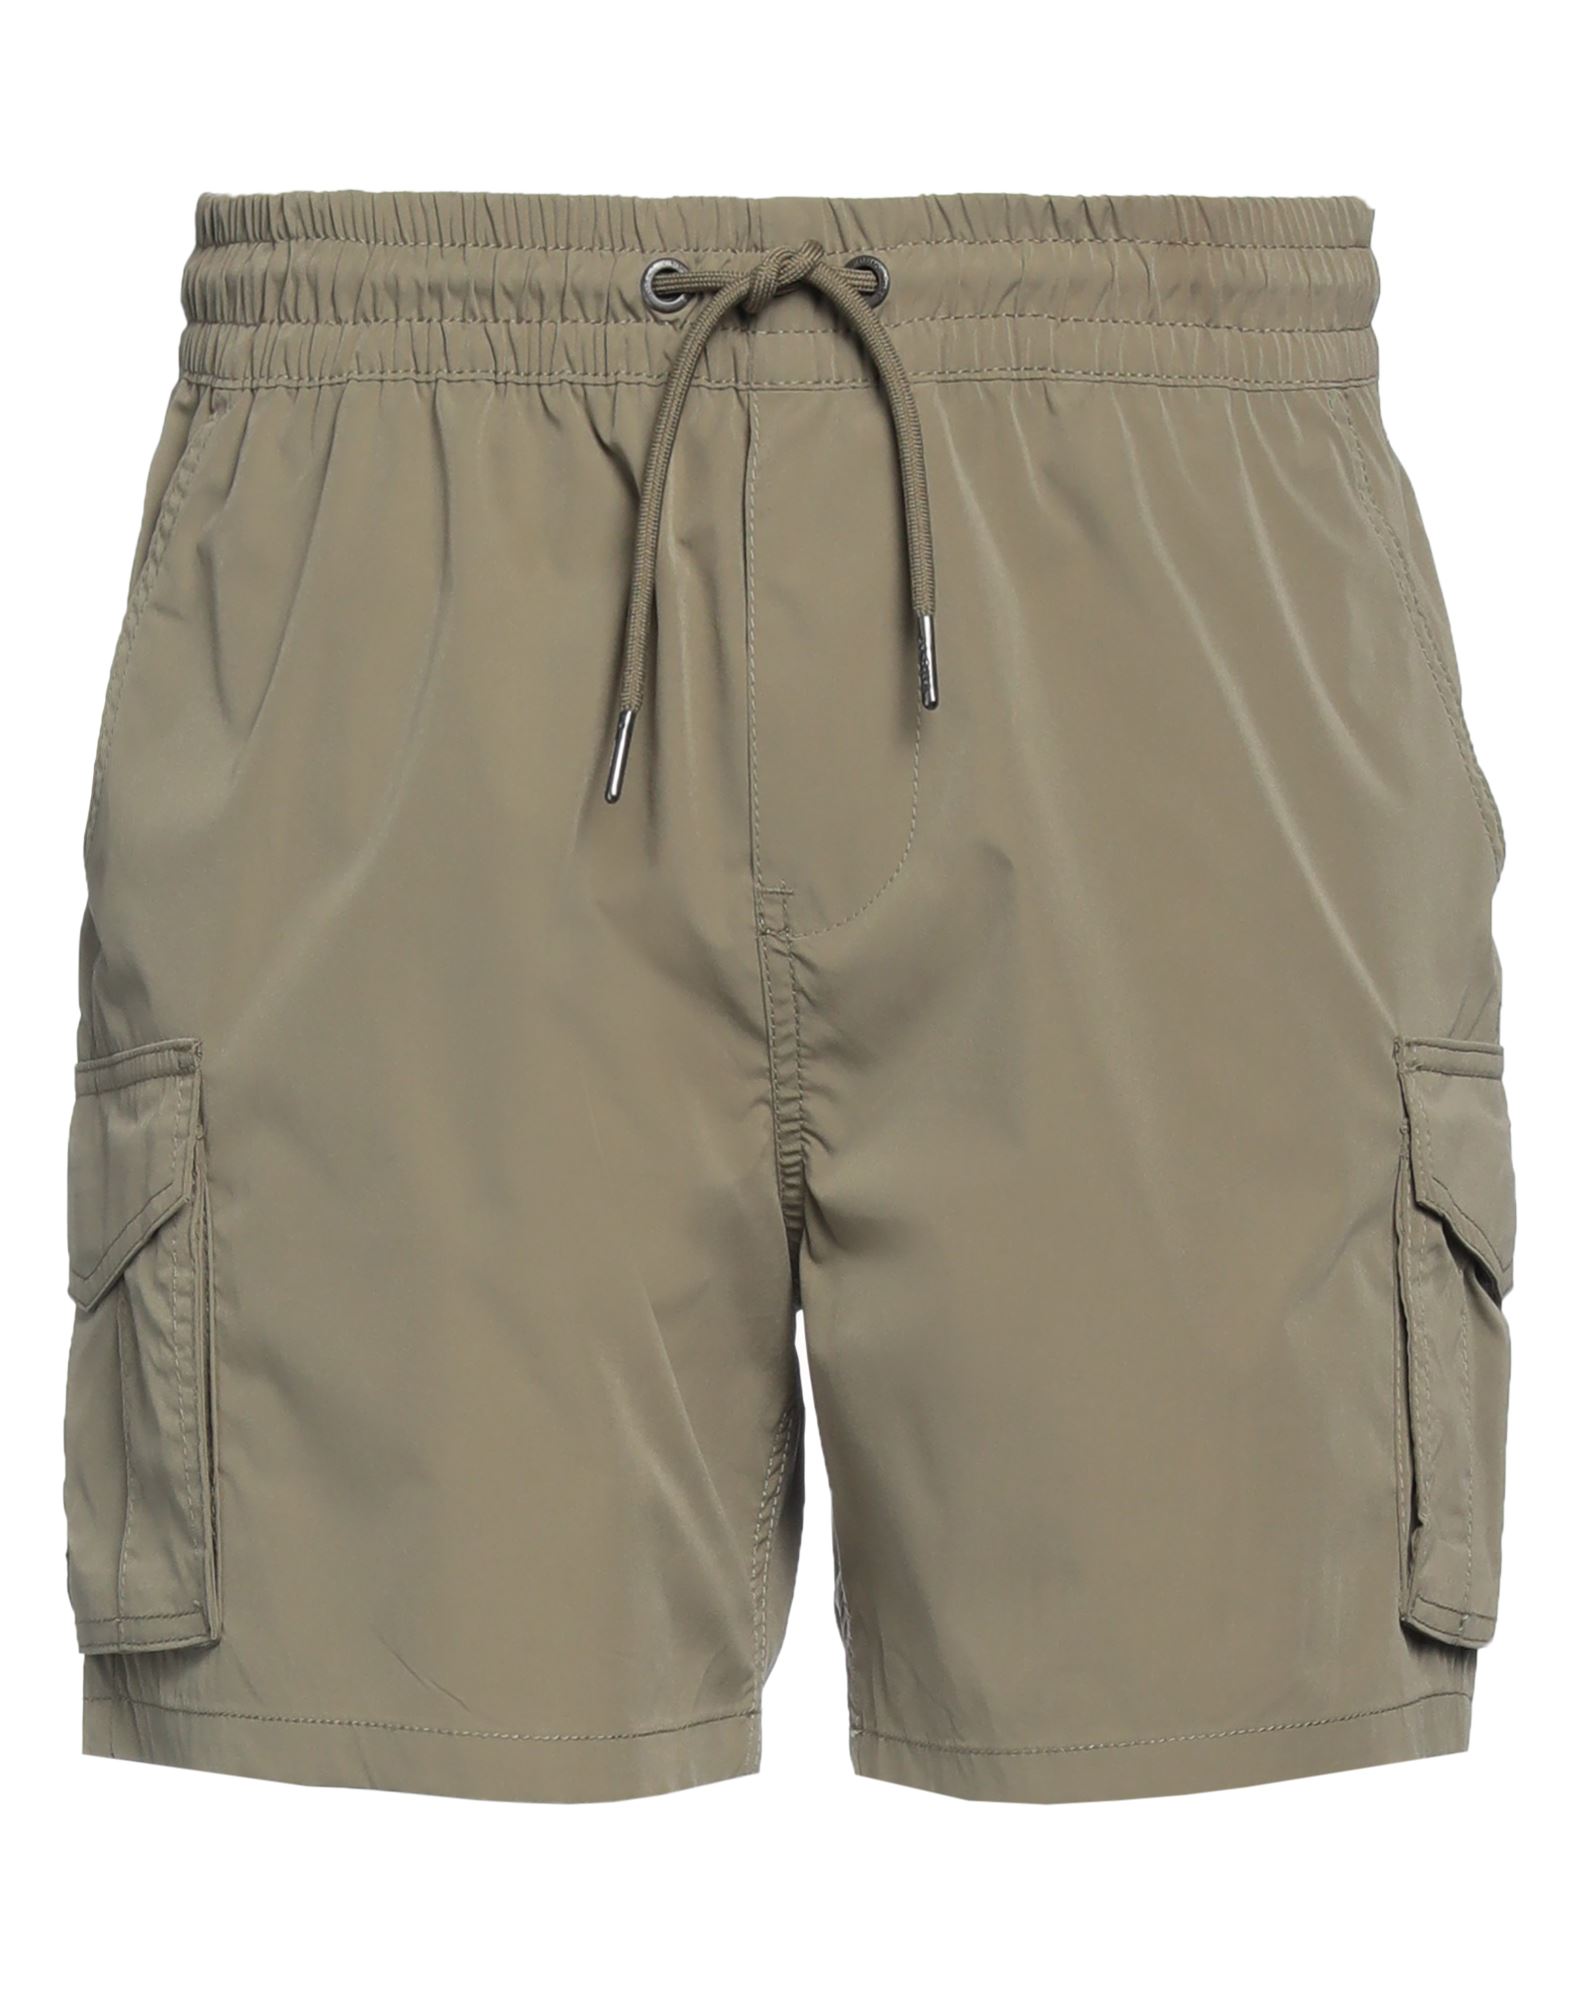 ALPHA INDUSTRIES ALPHA INDUSTRIES MAN SHORTS & BERMUDA SHORTS MILITARY GREEN SIZE S POLYESTER